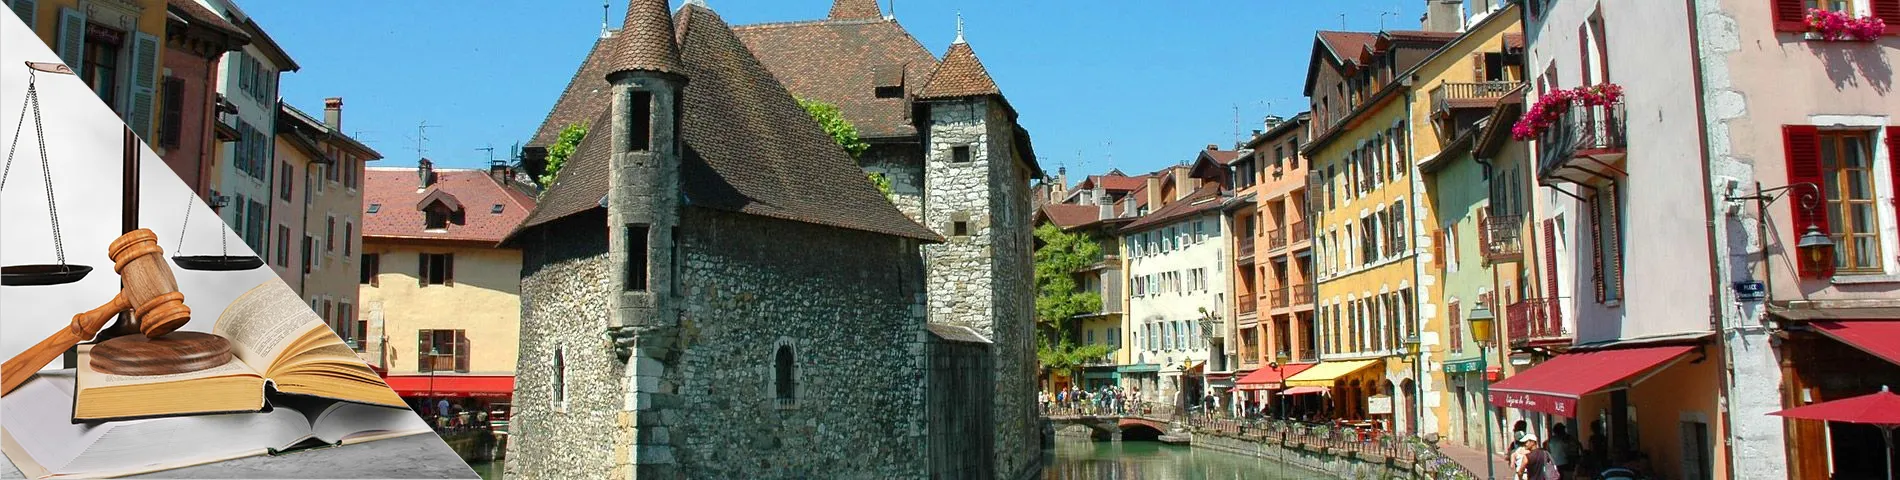 Annecy - Law